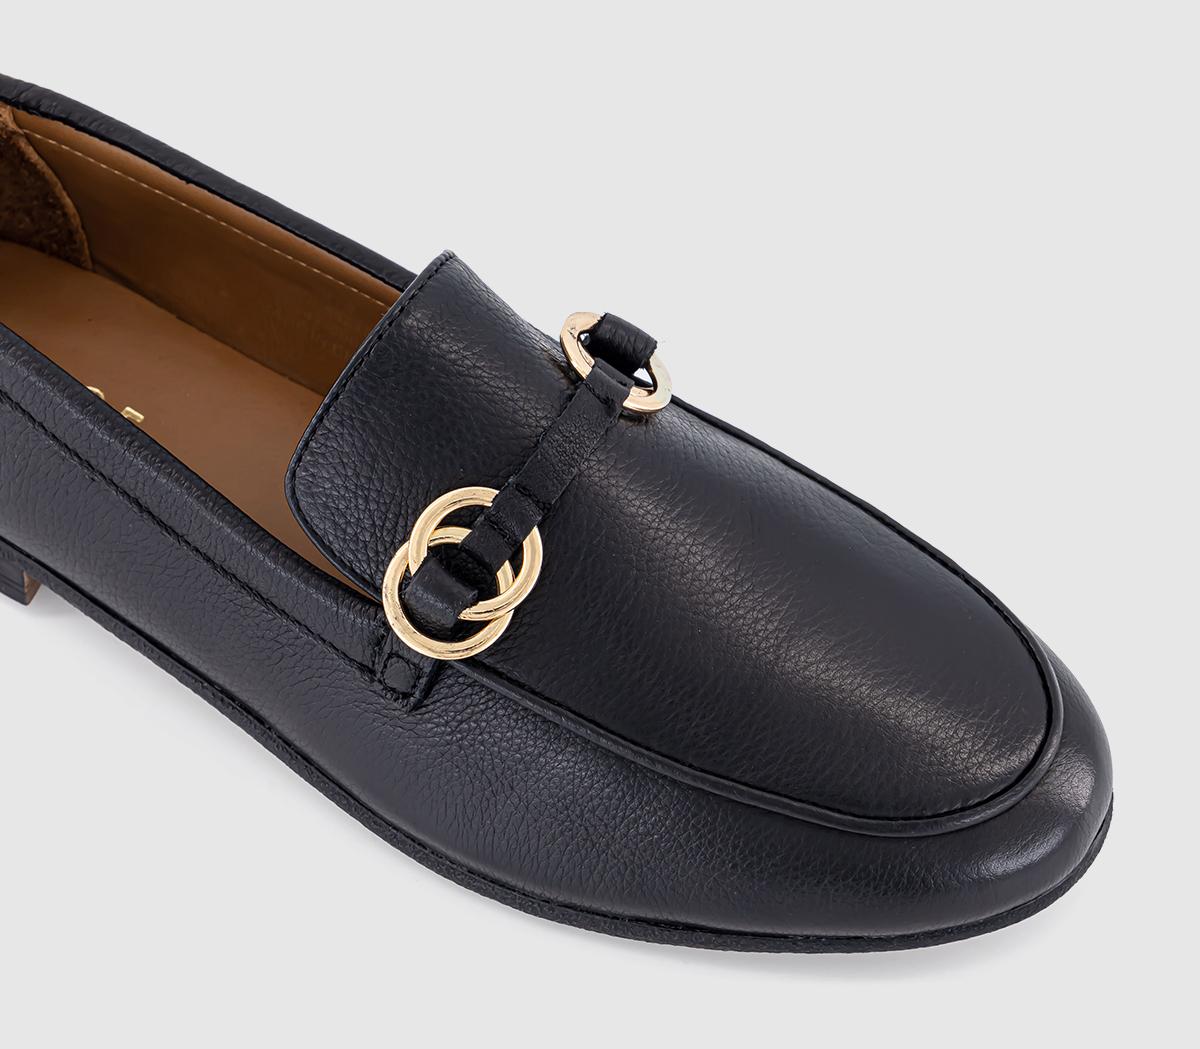 OFFICE Felipa Trim Leather Loafers Black Leather - Flat Shoes for Women